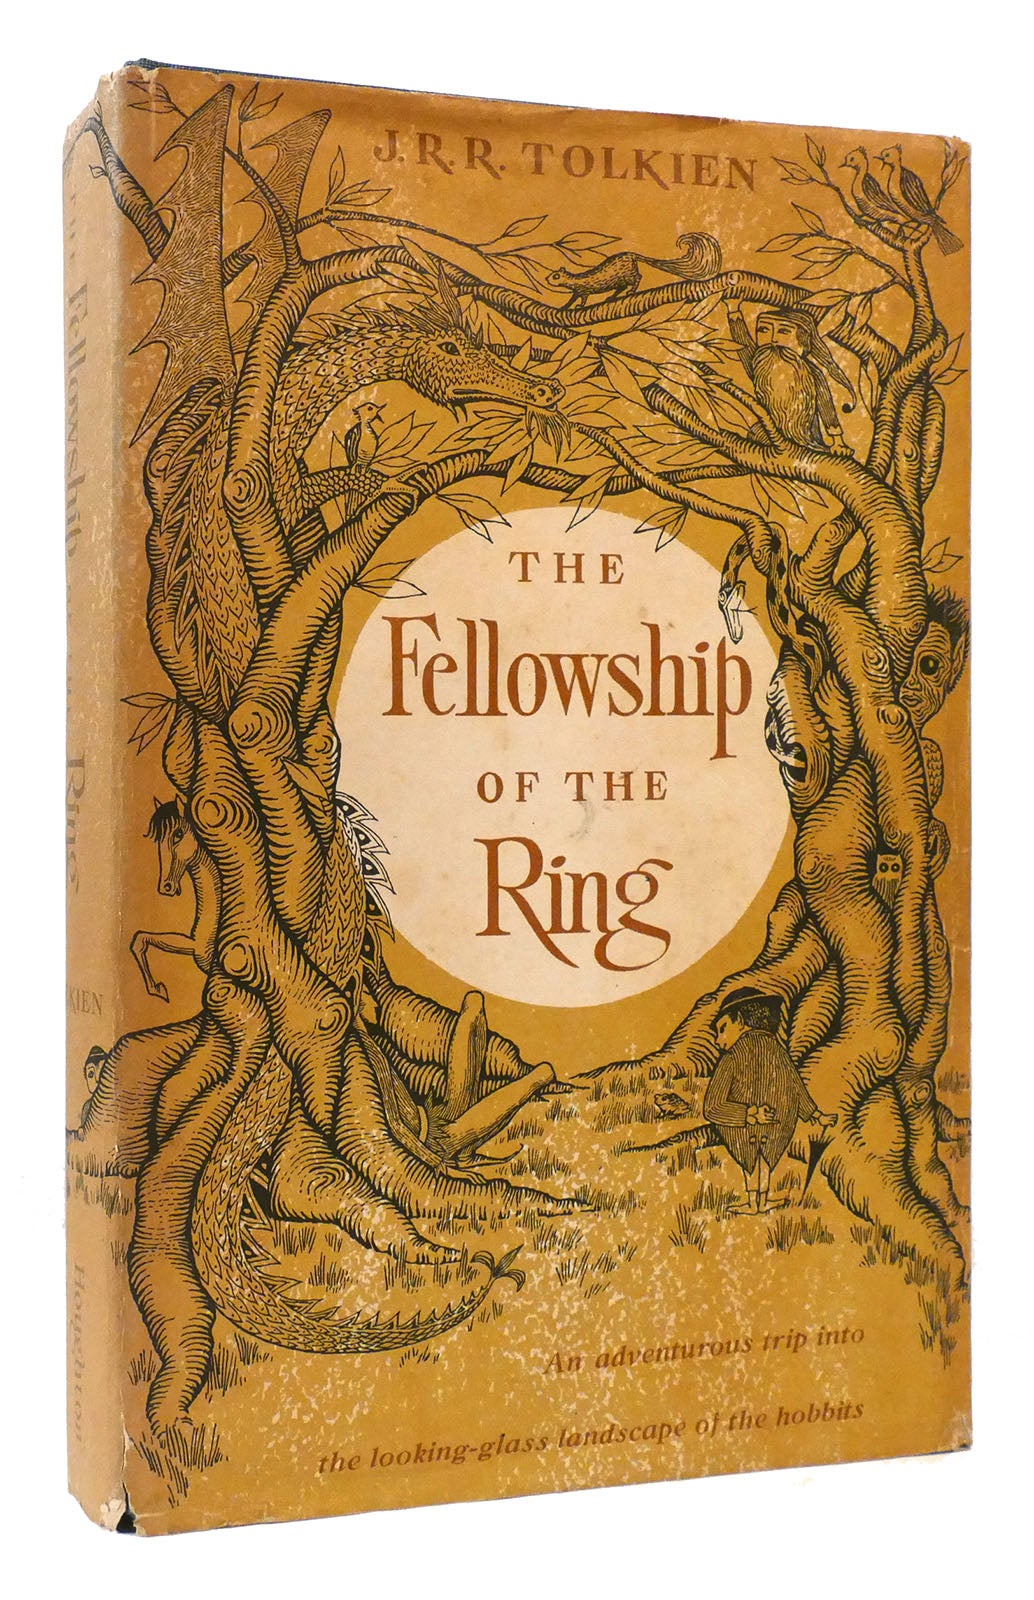 the lord of the rings original book cover